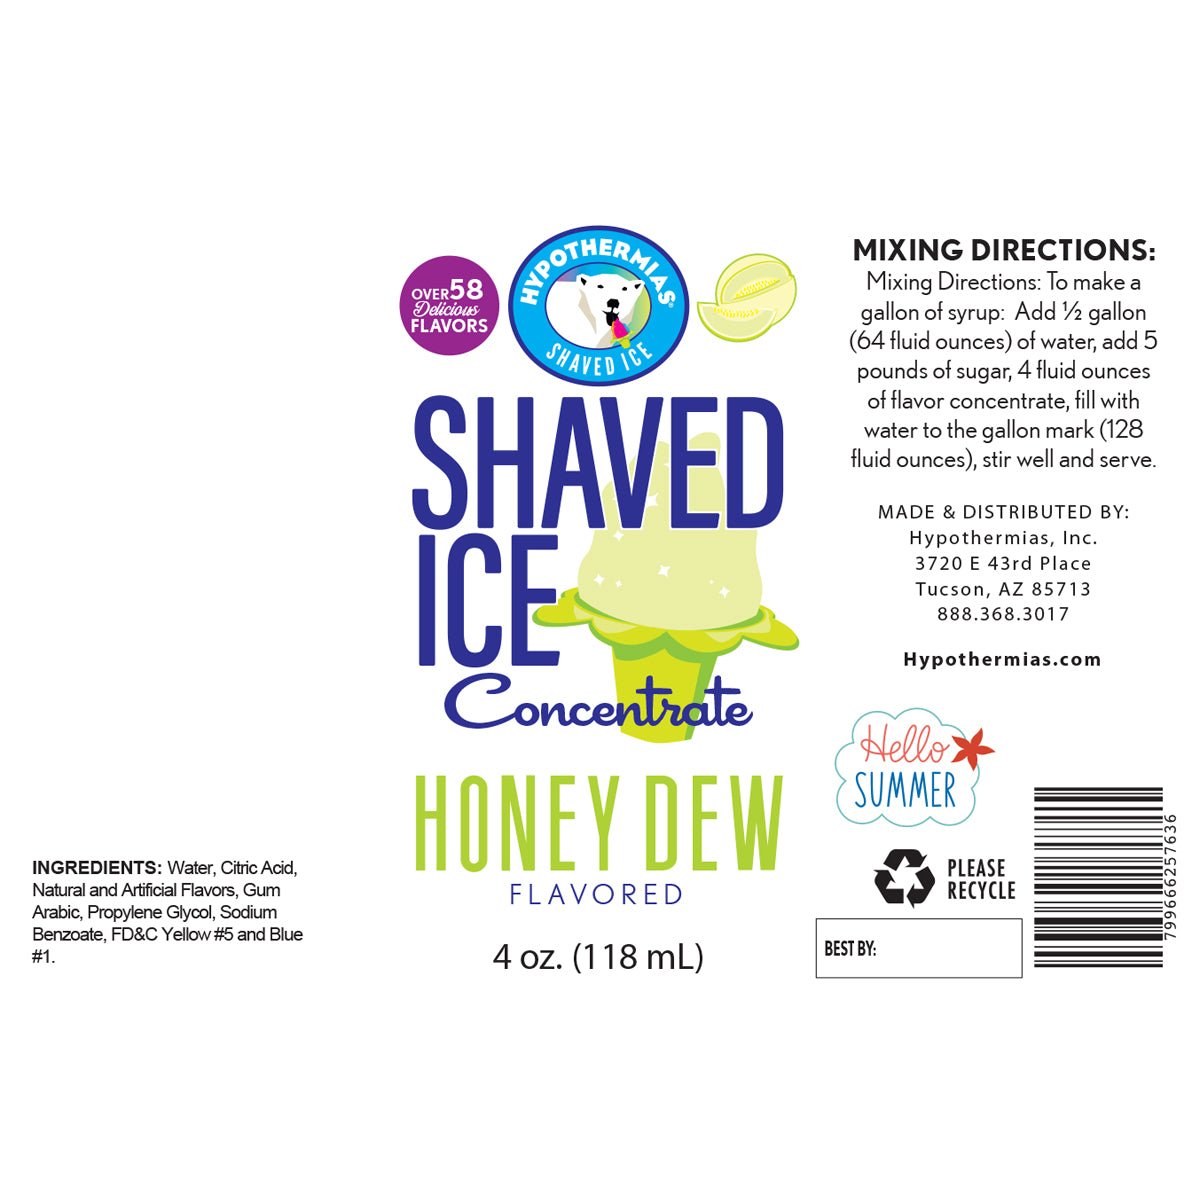 Hypothermias honey dew shaved ice or snow cone flavor syrup concentrate ingredient label.